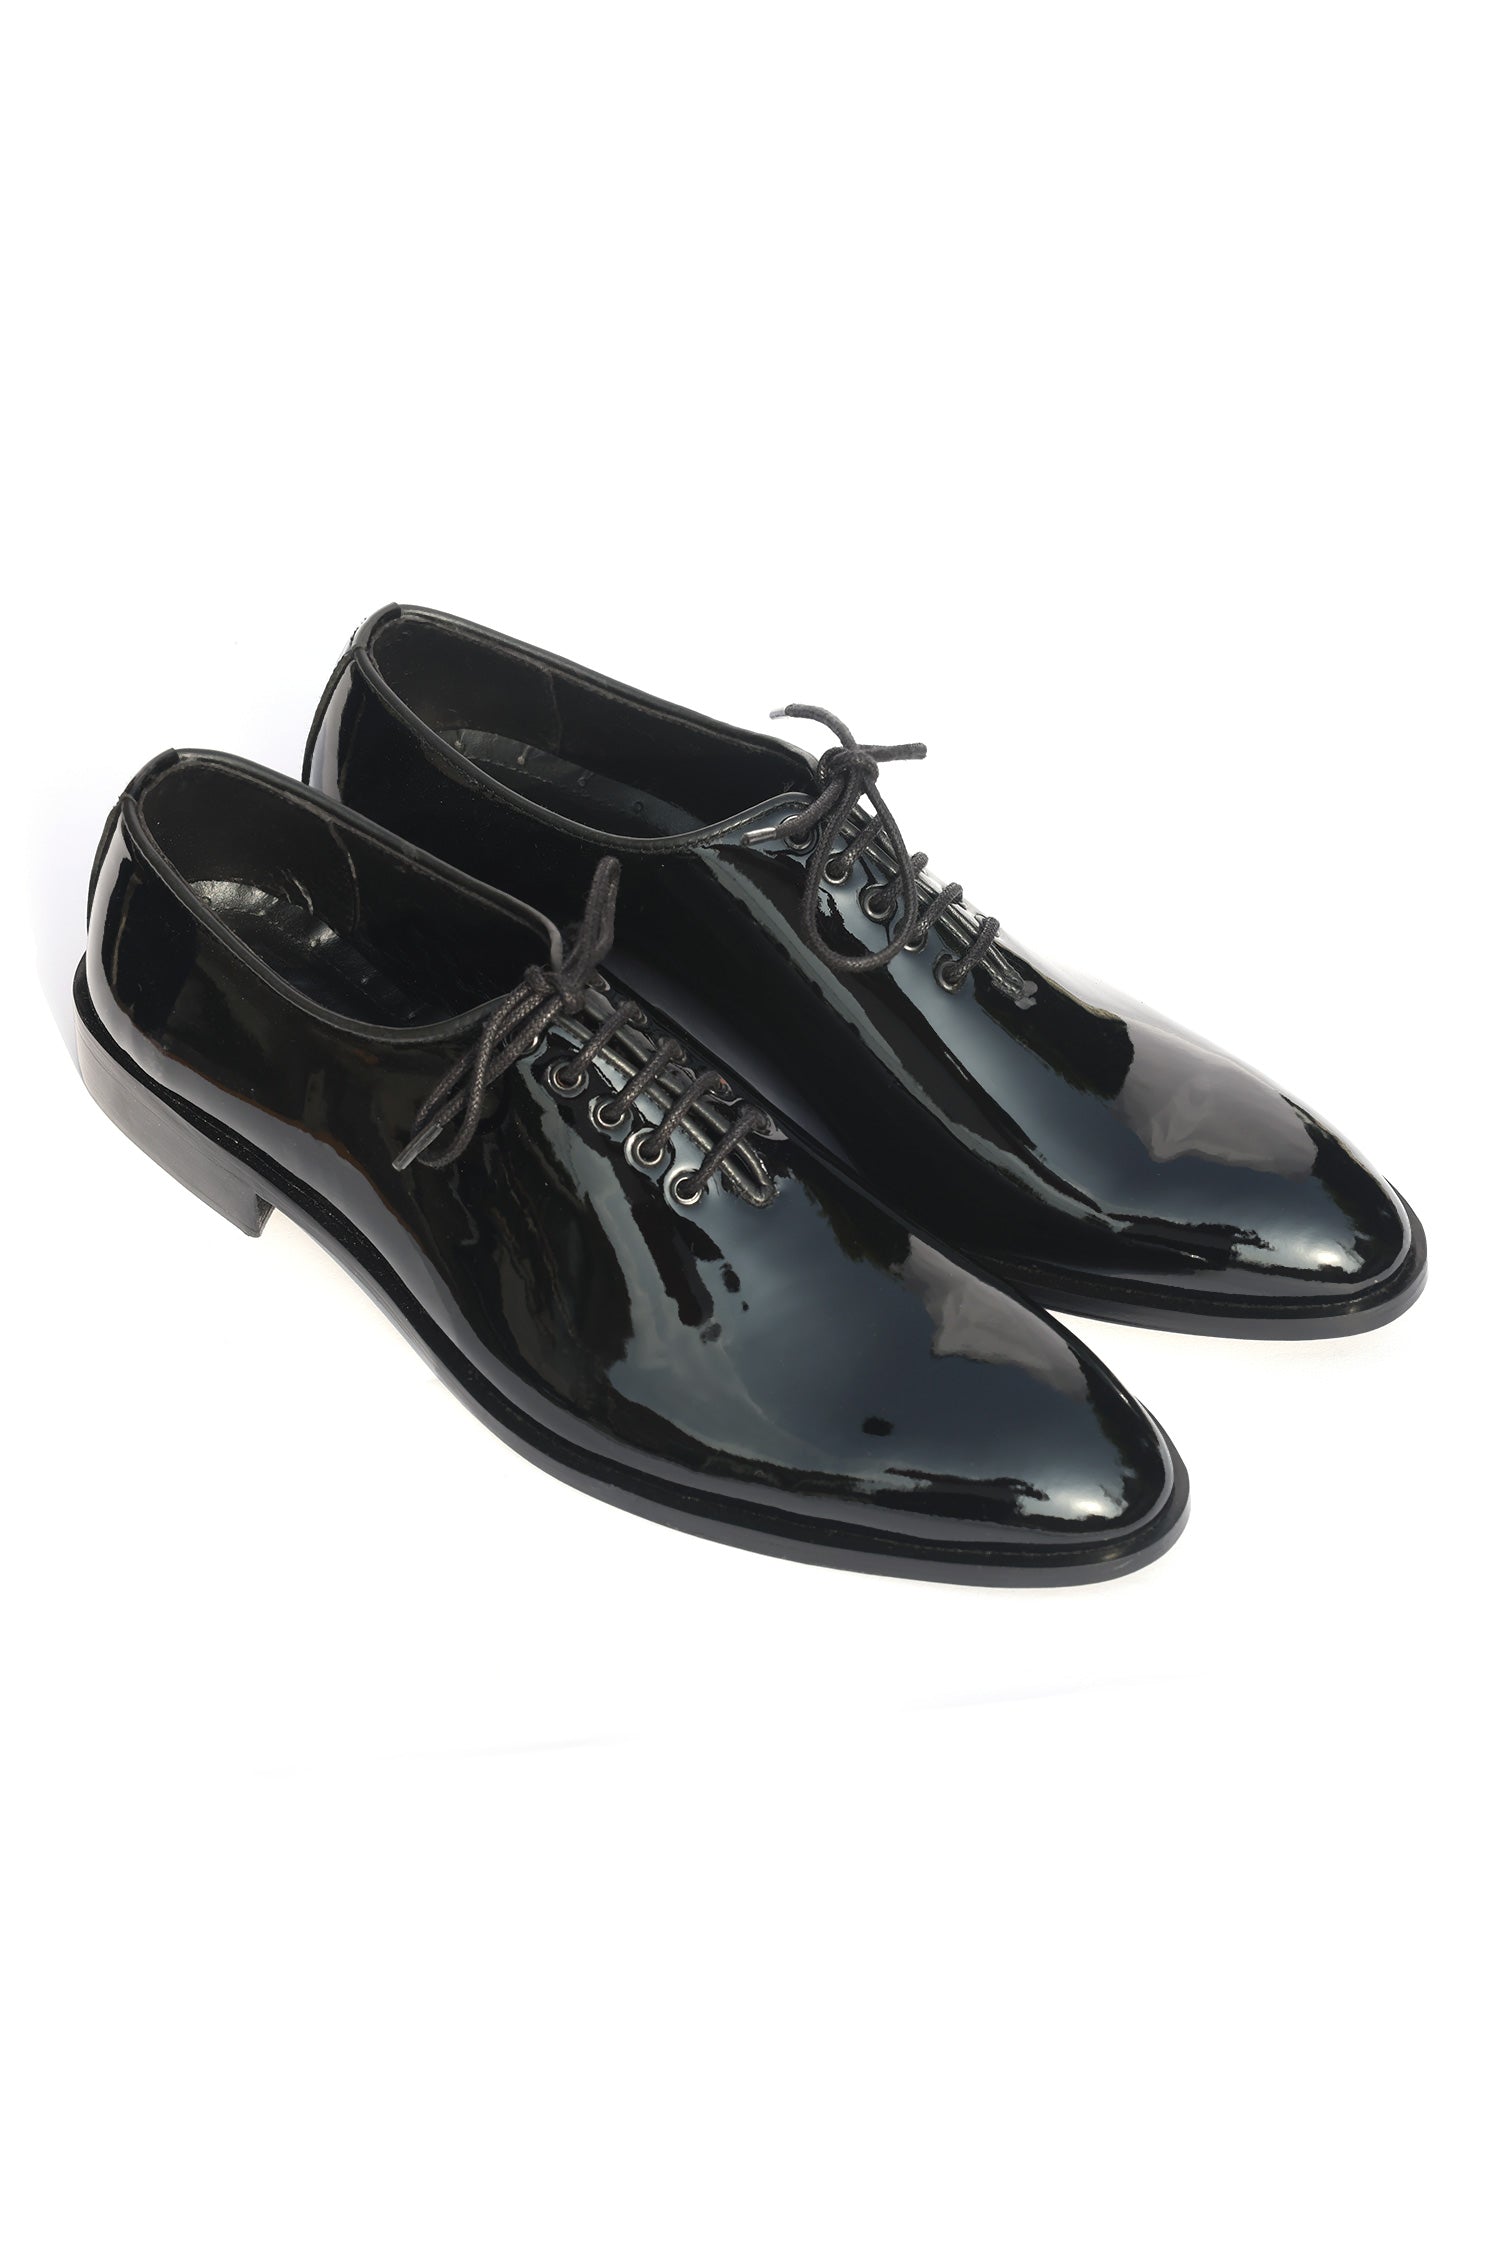 PATENT LEATHER OXFORDS-BLACK